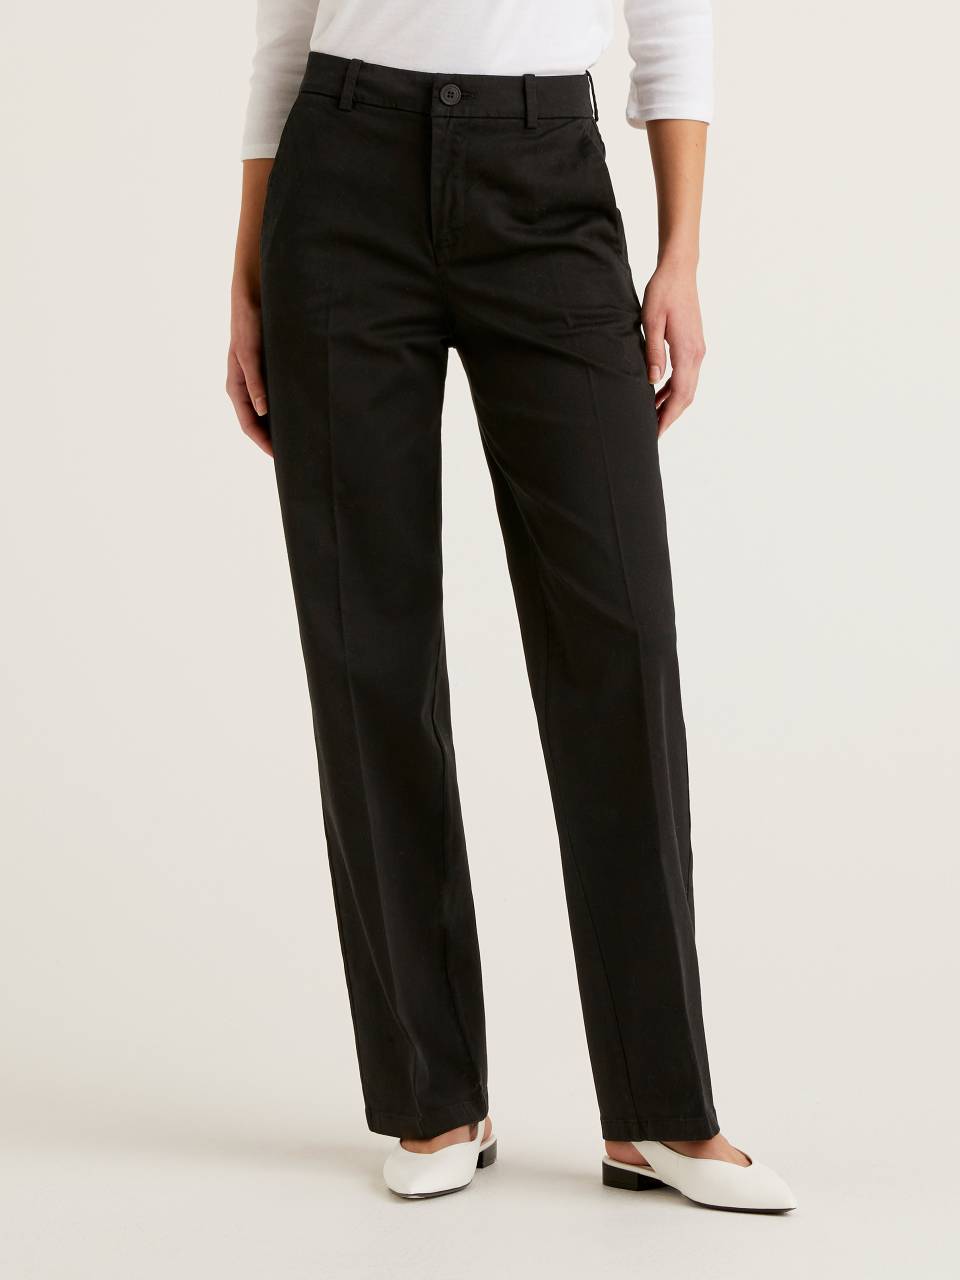 Benetton Trousers with wide leg. 1